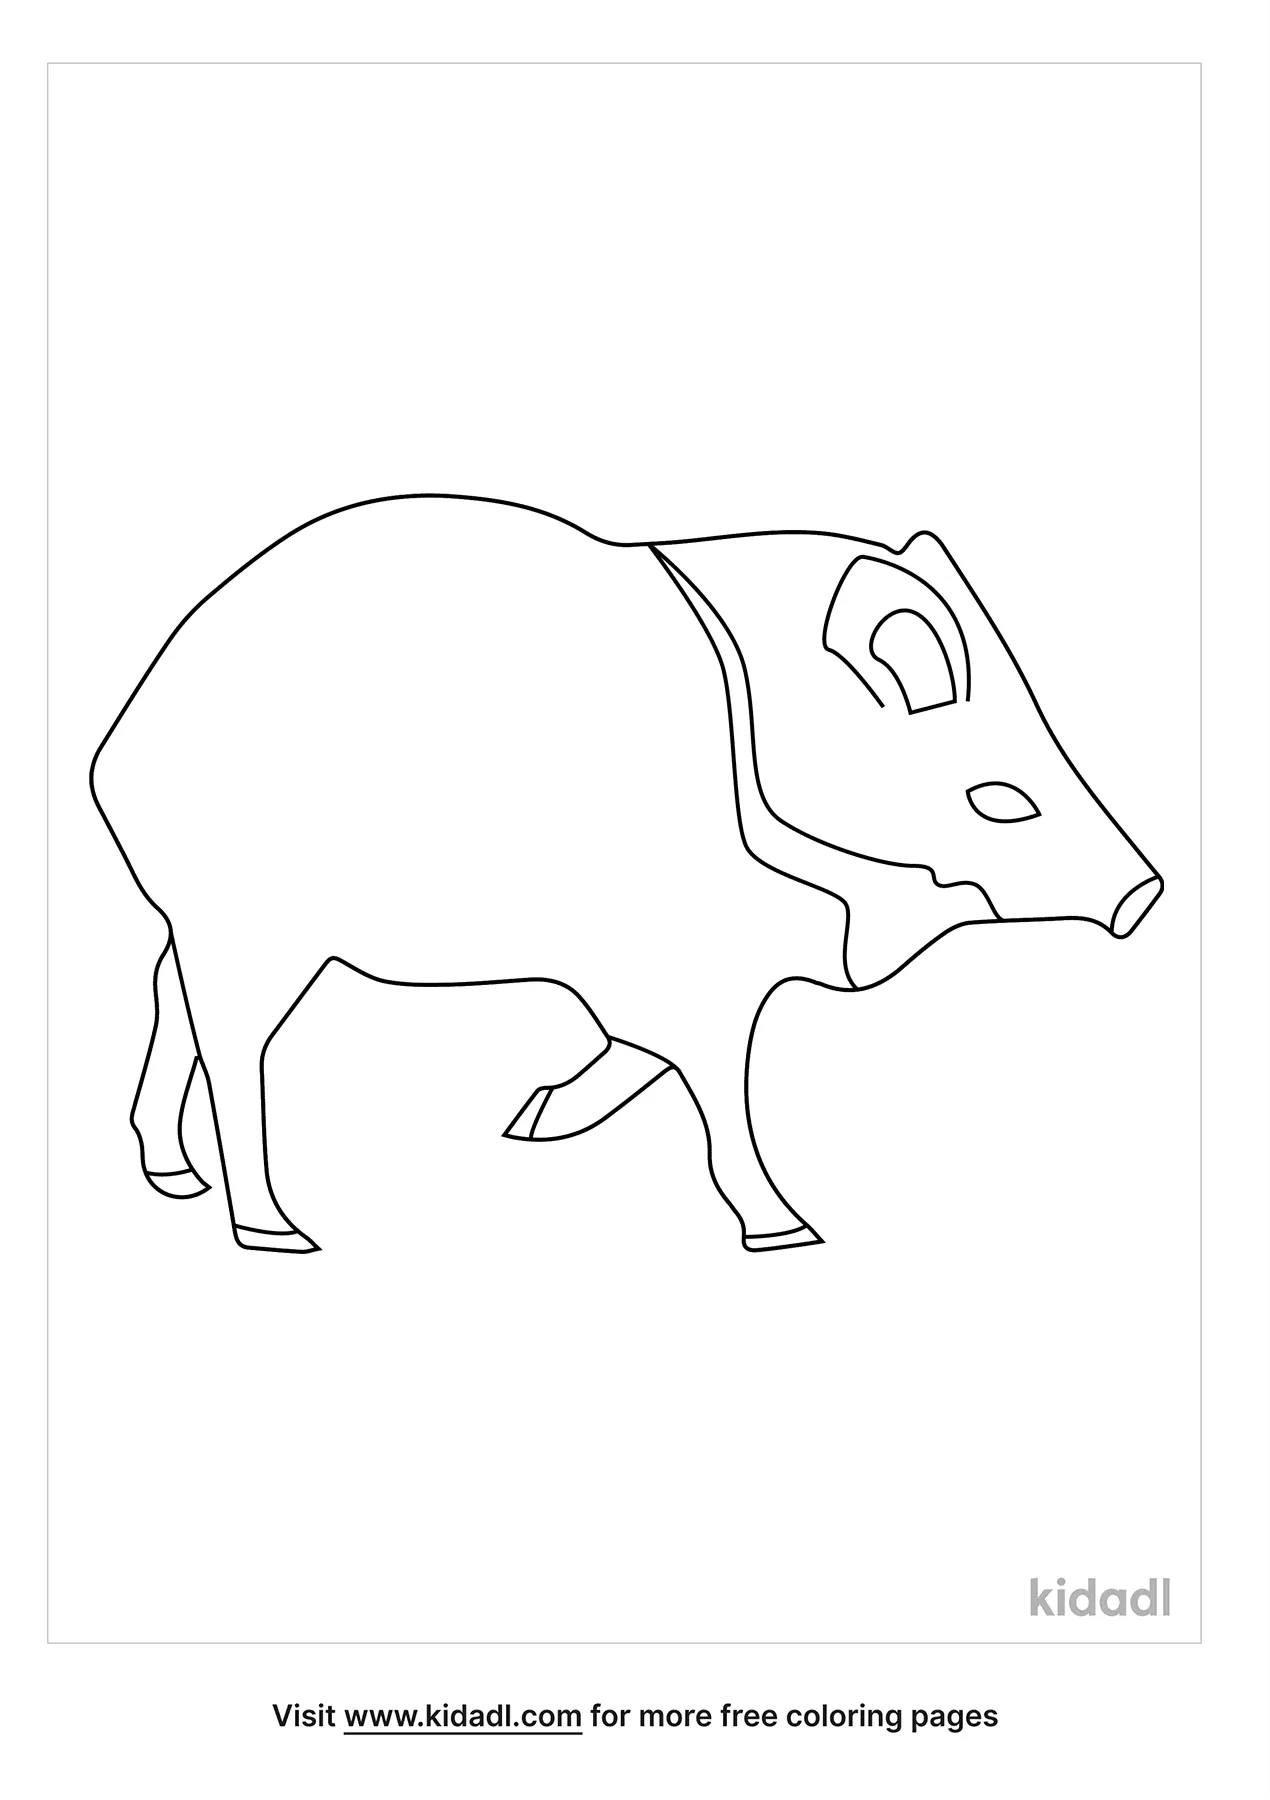 Free javelina coloring page coloring page printables